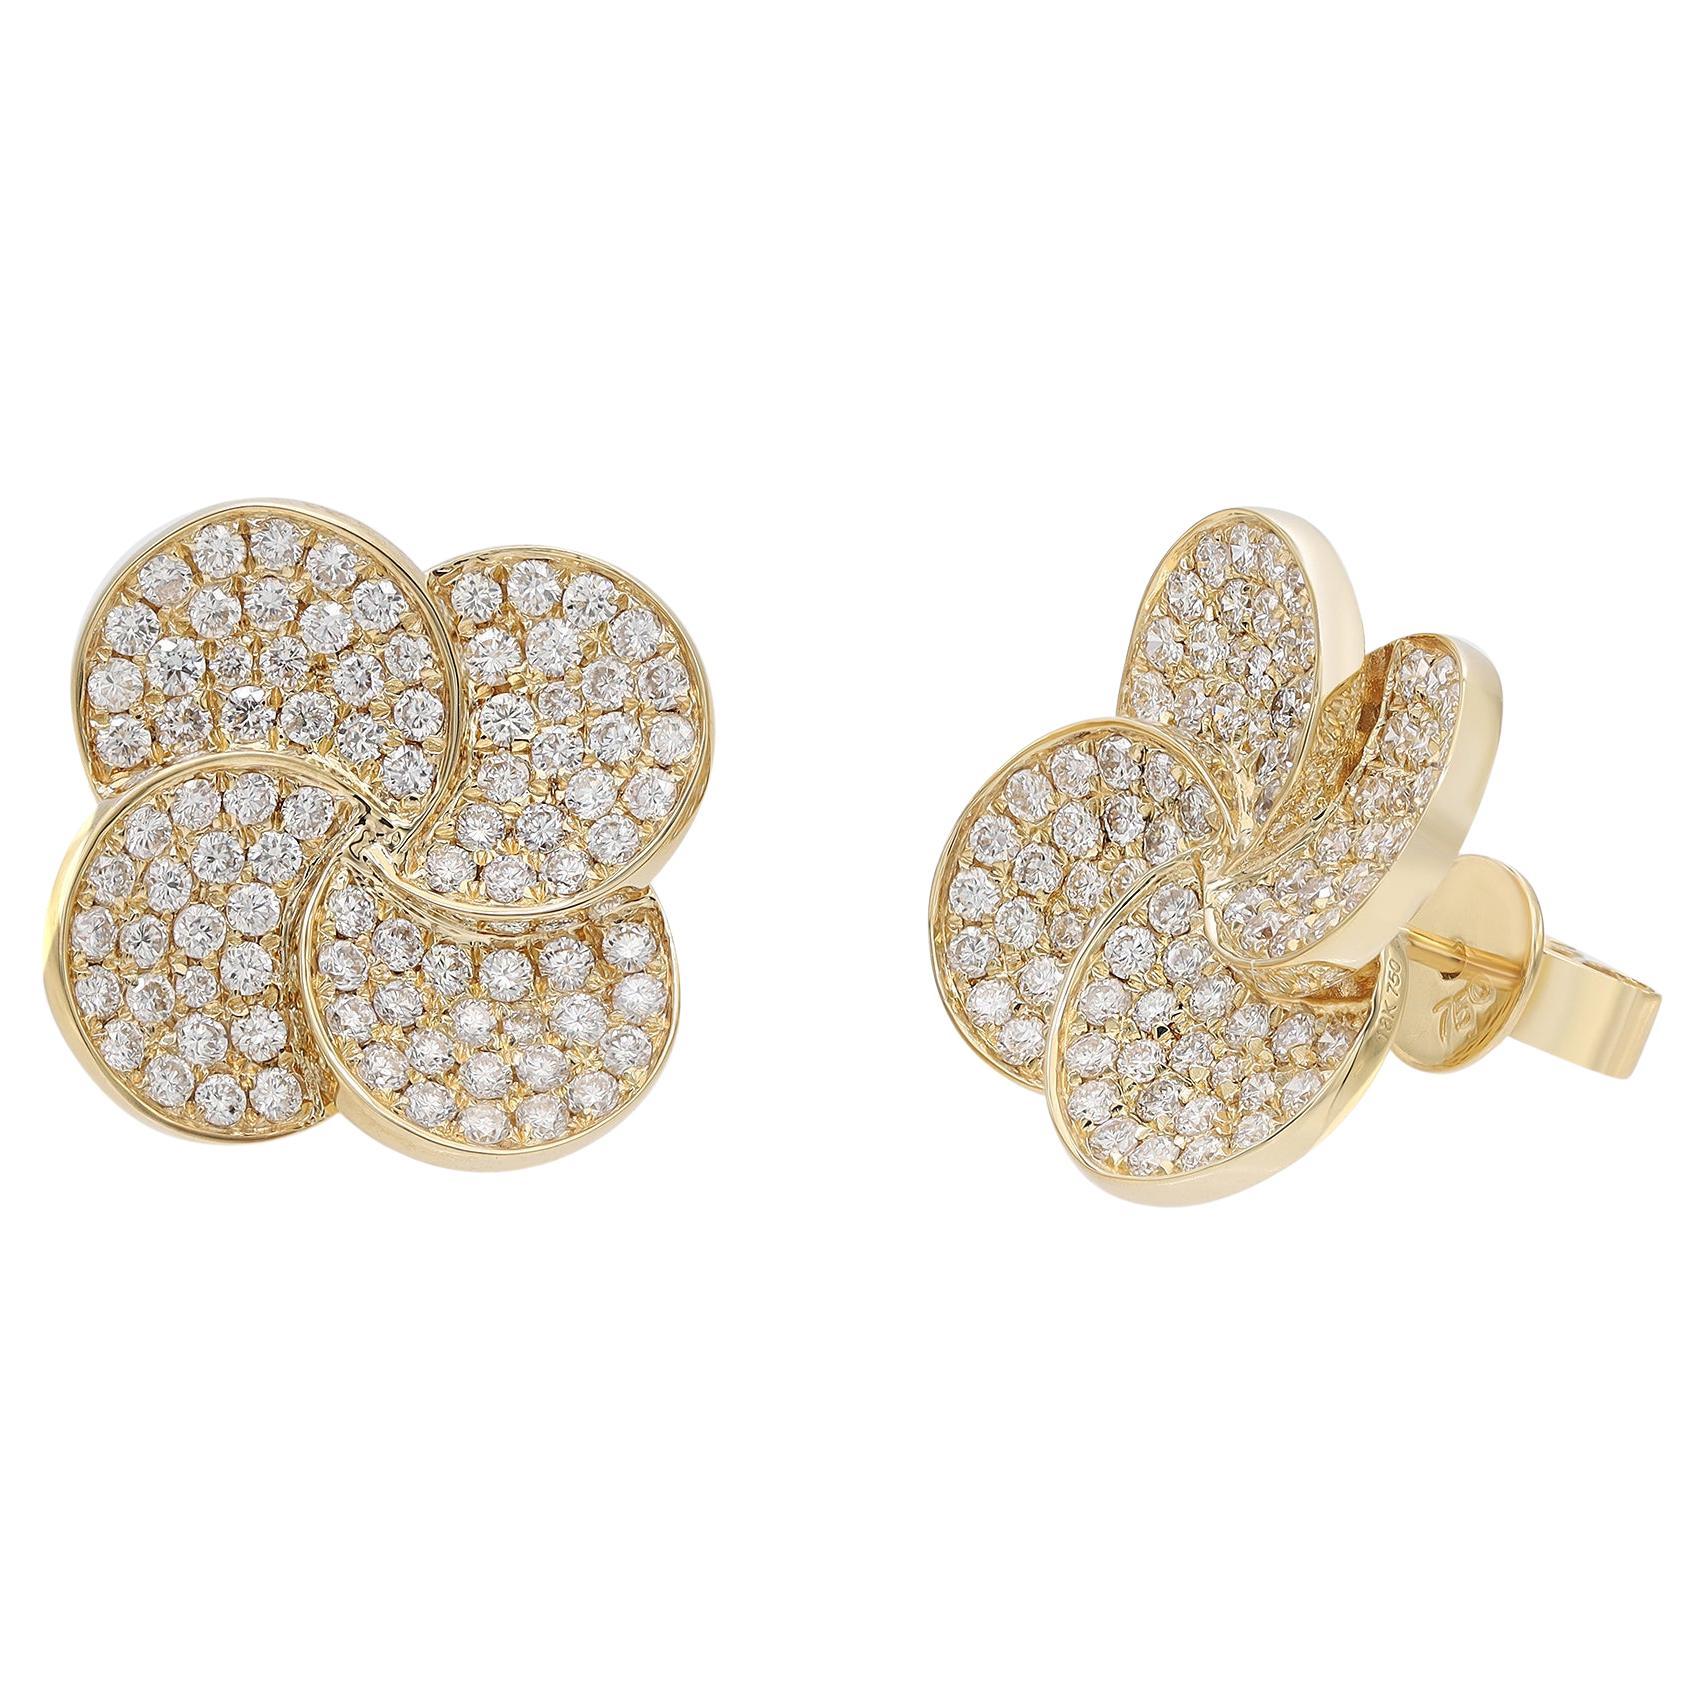 Pave Set Round Cut Diamond Flower Stud Earring 18K Yellow Gold 1.45Cttw For Sale